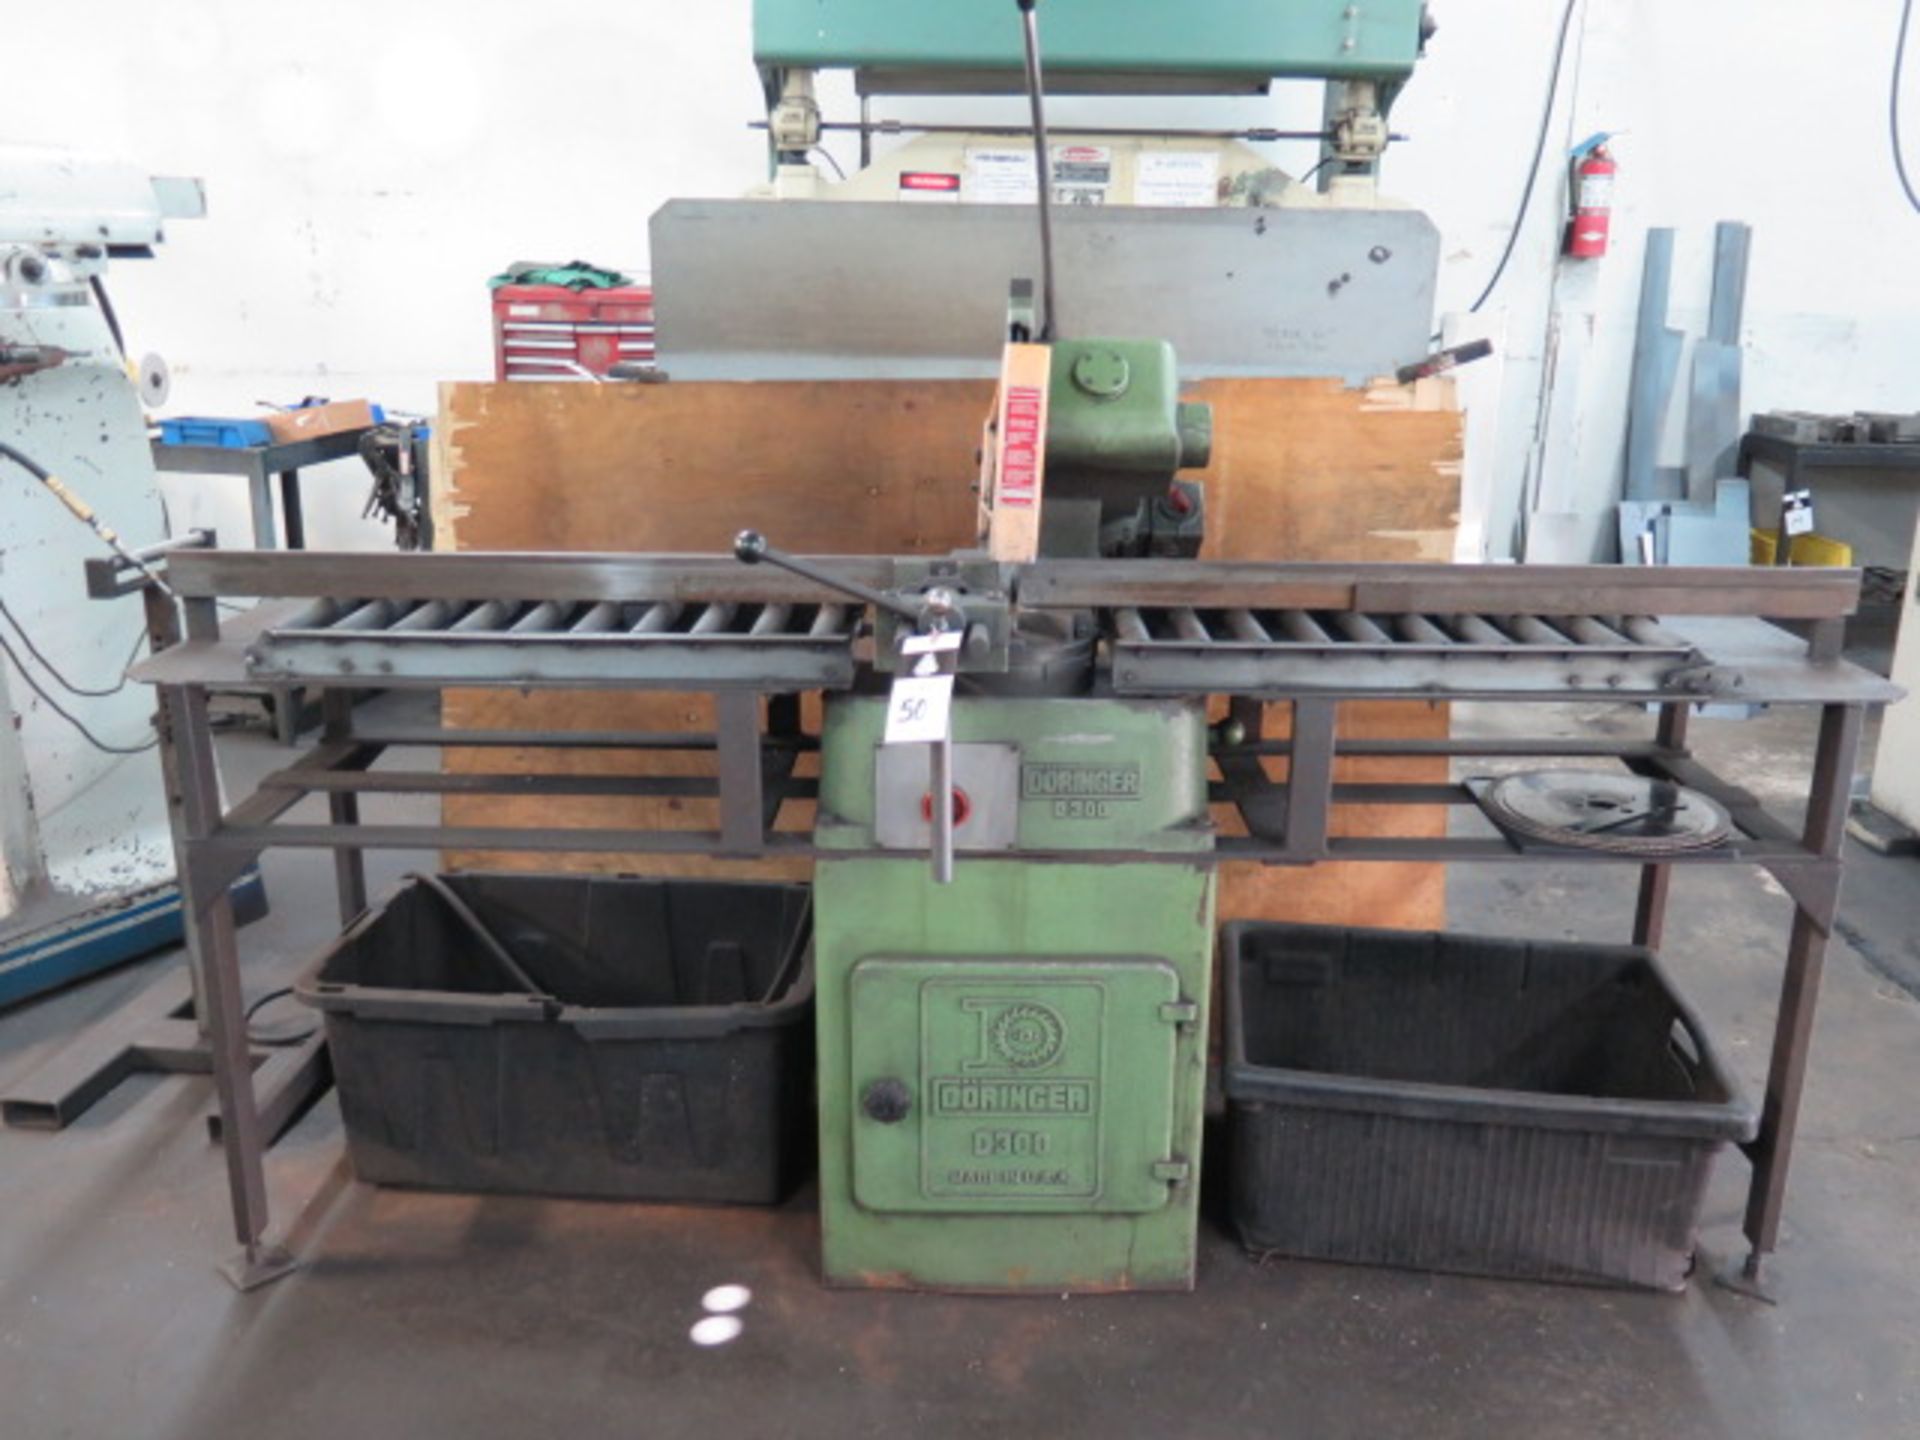 Doringer D-300 Miter Cold Saw s/n 18417 w/ 2-Speeds, Speed Clamping, Extended Table, SOLD AS IS